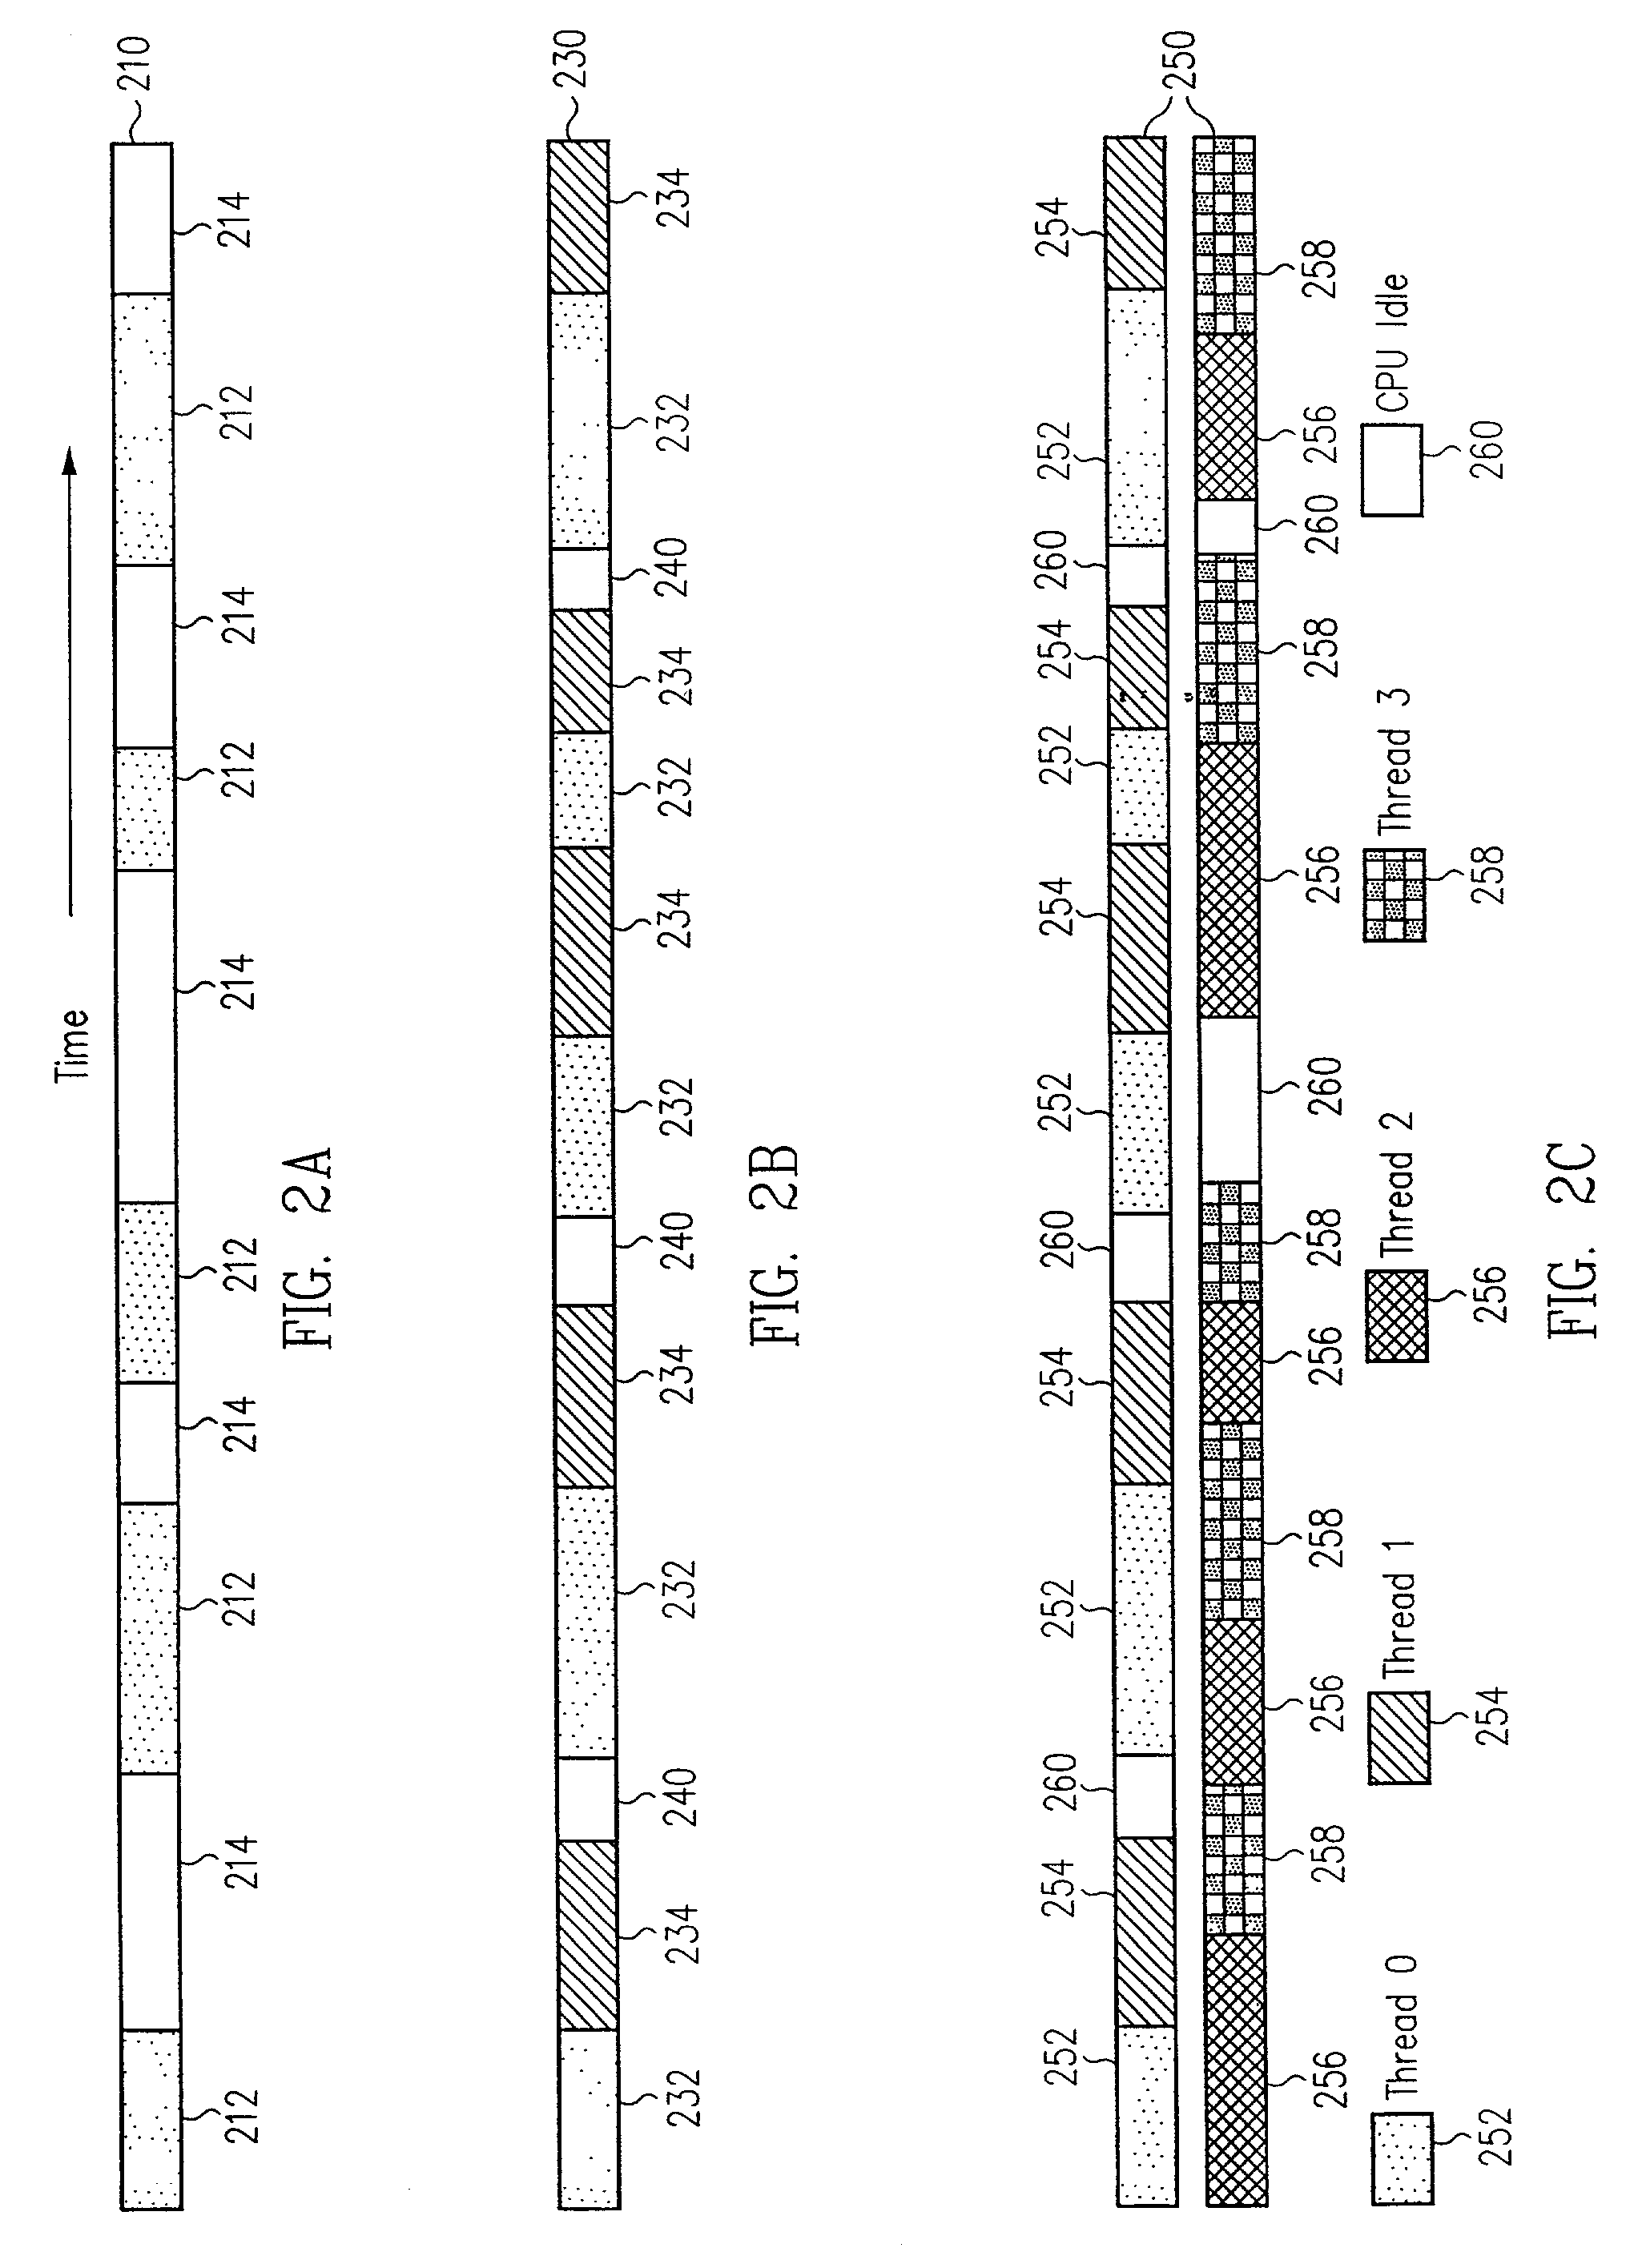 Switching method in a multi-threaded processor